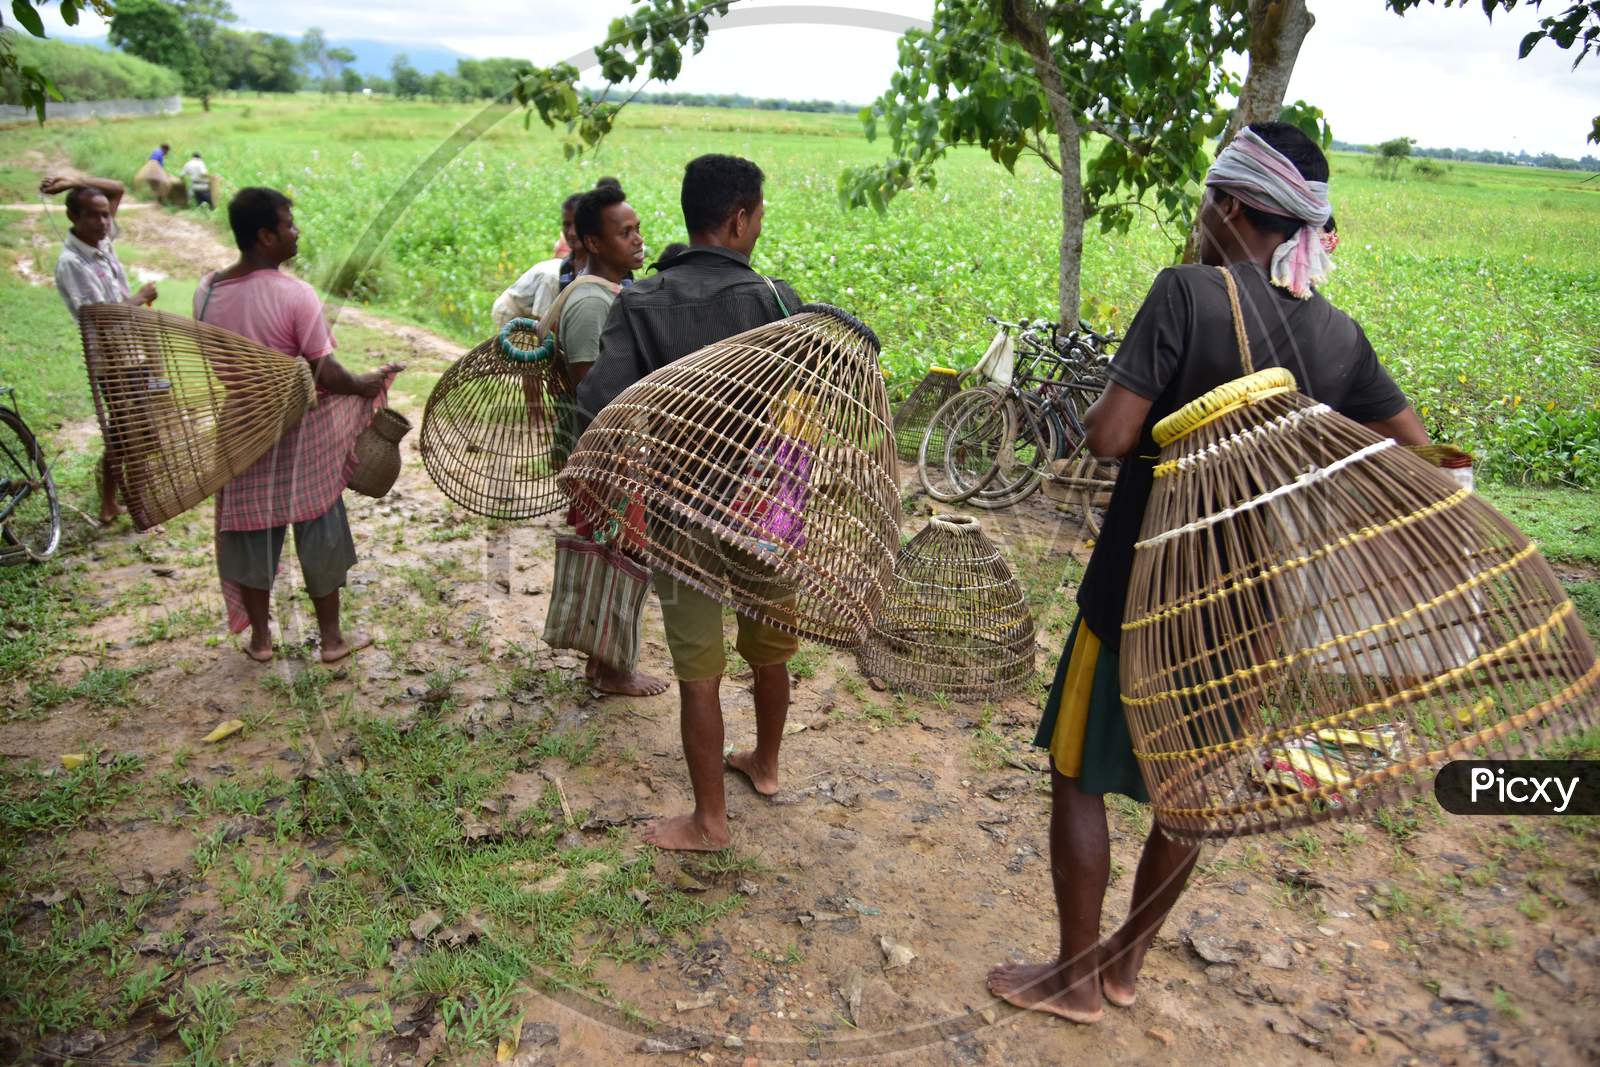 Nagaon:Villagers Arrives With Their Fishing Tool To  Catch Fish At A Field At Kampur In Nagaon District Of Assam On Sept 27,2020.